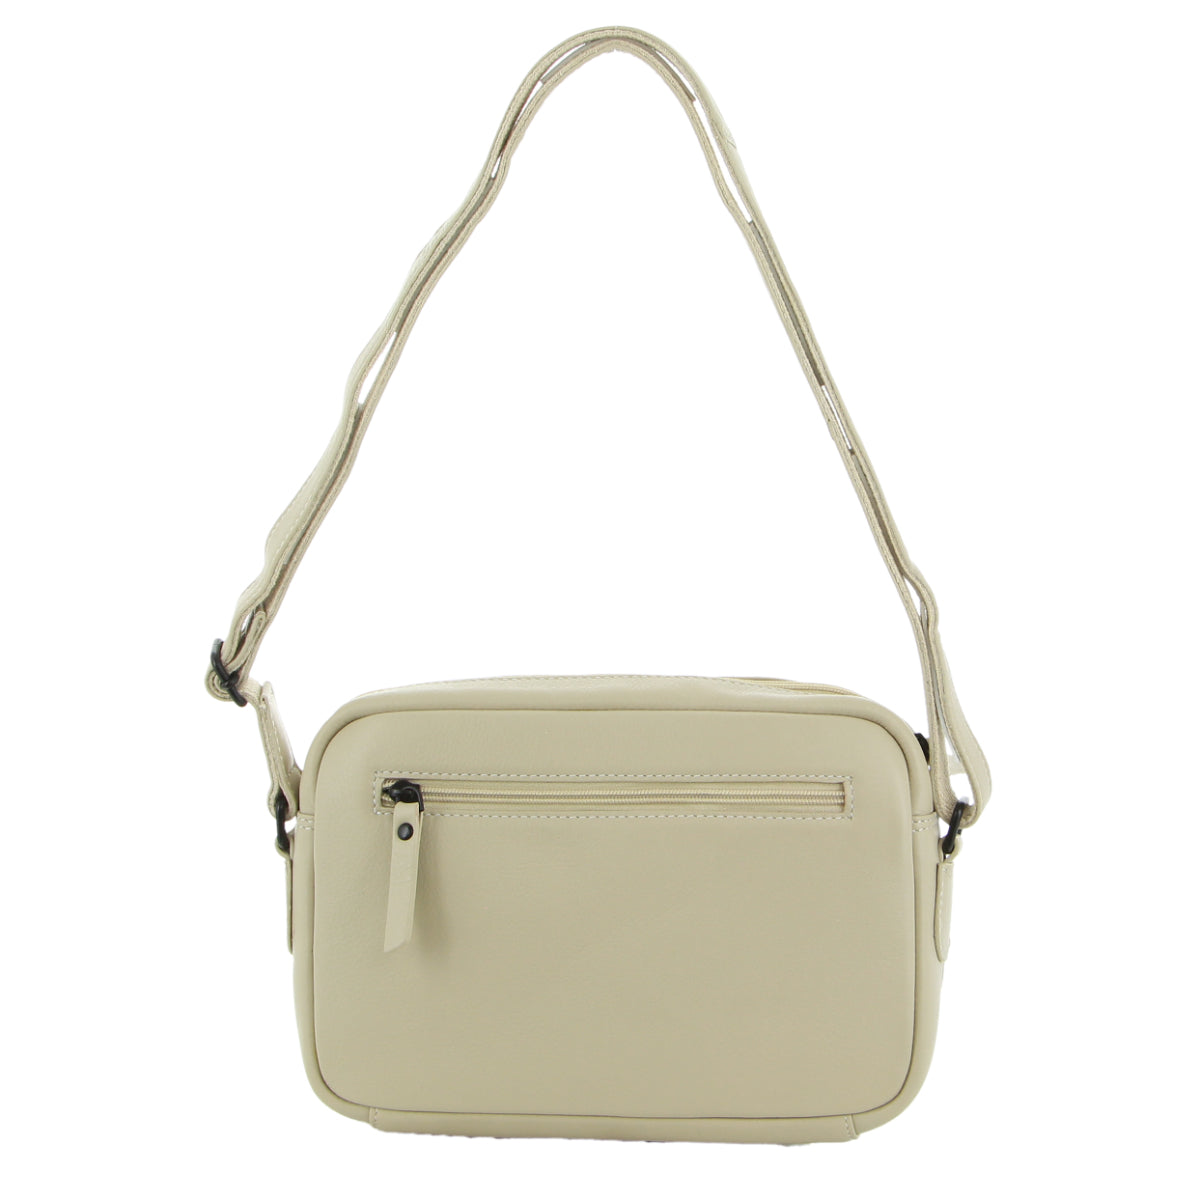 Milleni - NL3871 Small leather sidebag - Cement